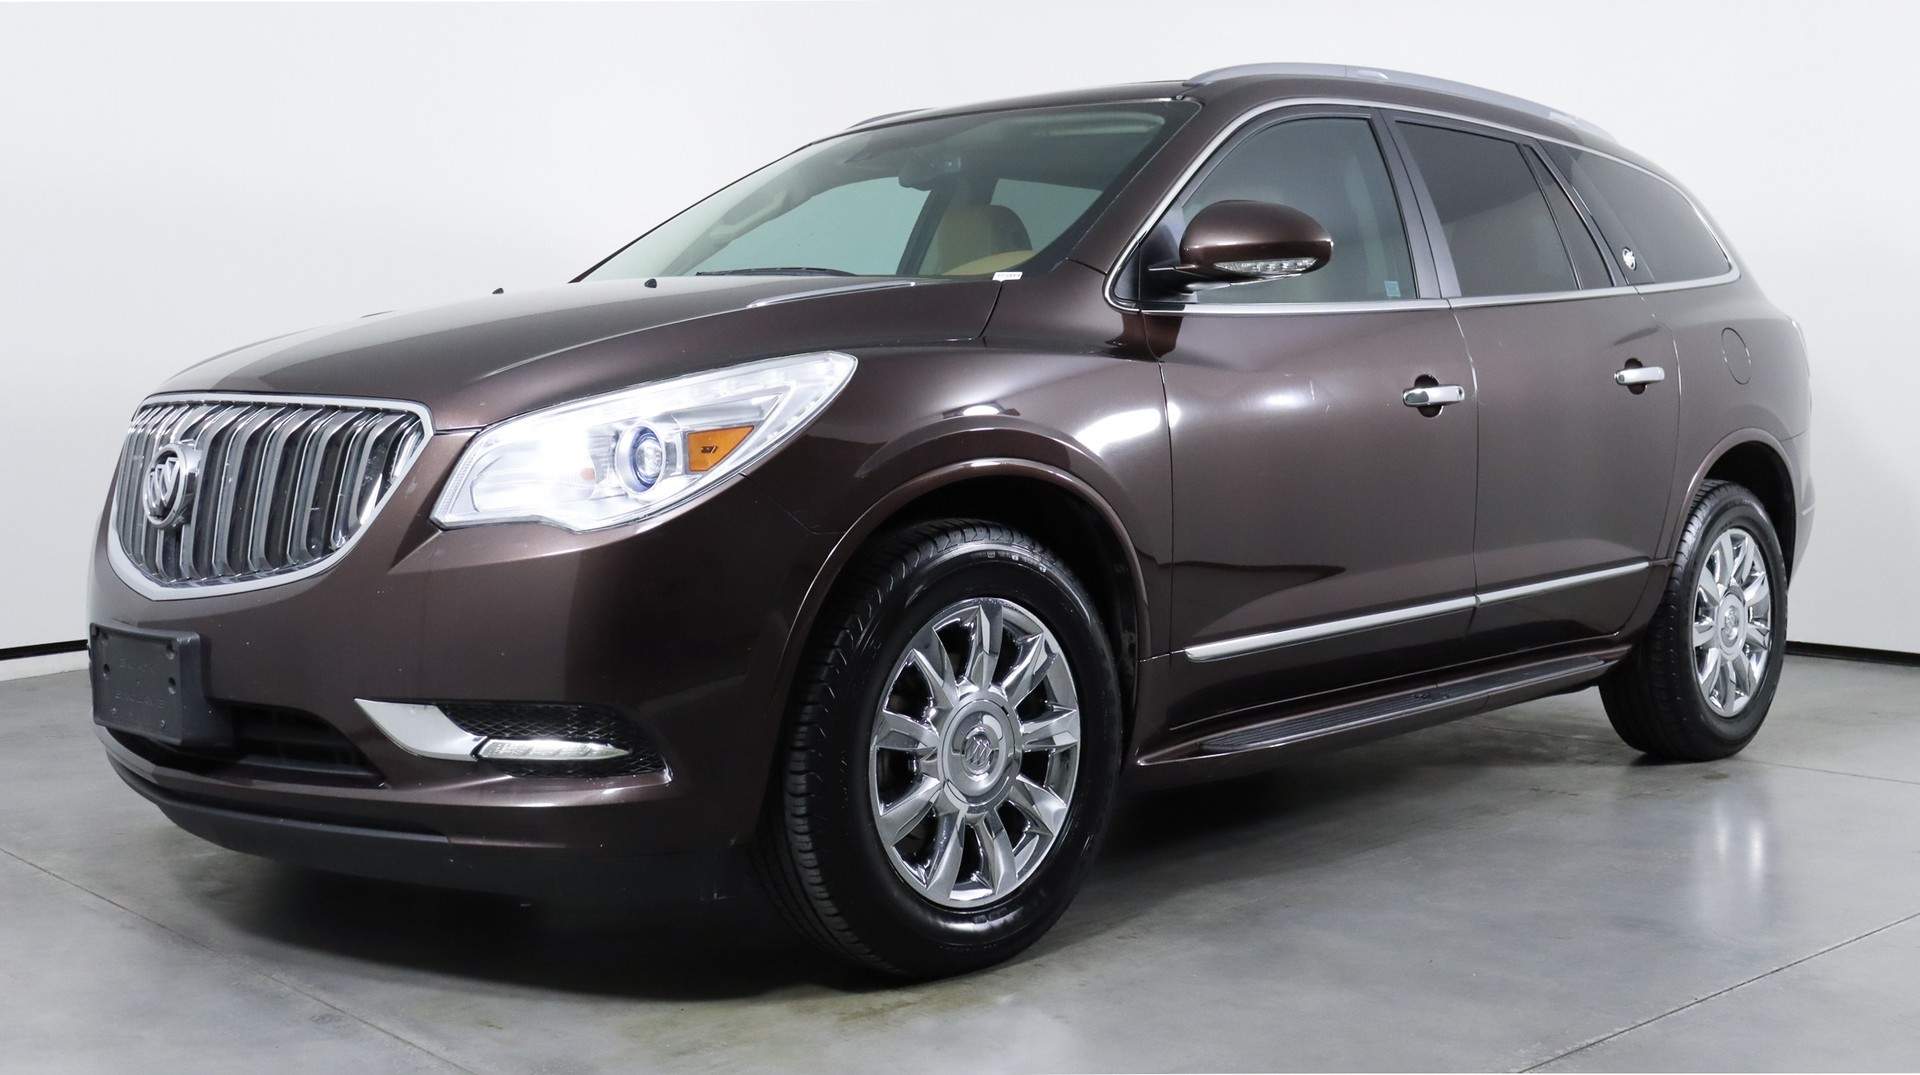 Used 2015 BUICK ENCLAVE LEATHER for sale in SAN ANTONIO | 124088 | Carvix